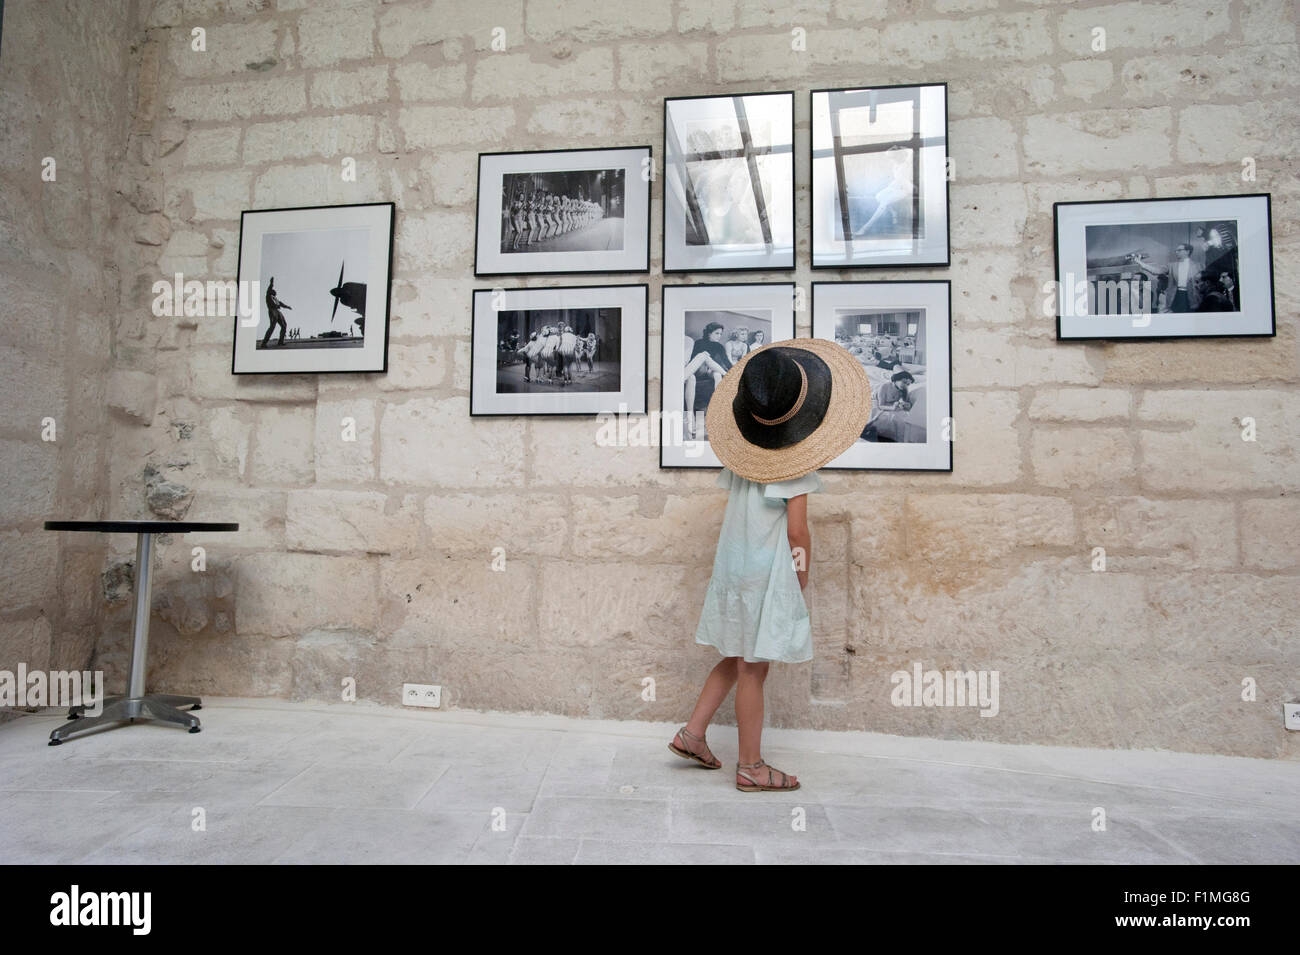 A small girl wearing two hats looks at vintage photographs in an art gallery in Arles, France. Stock Photo